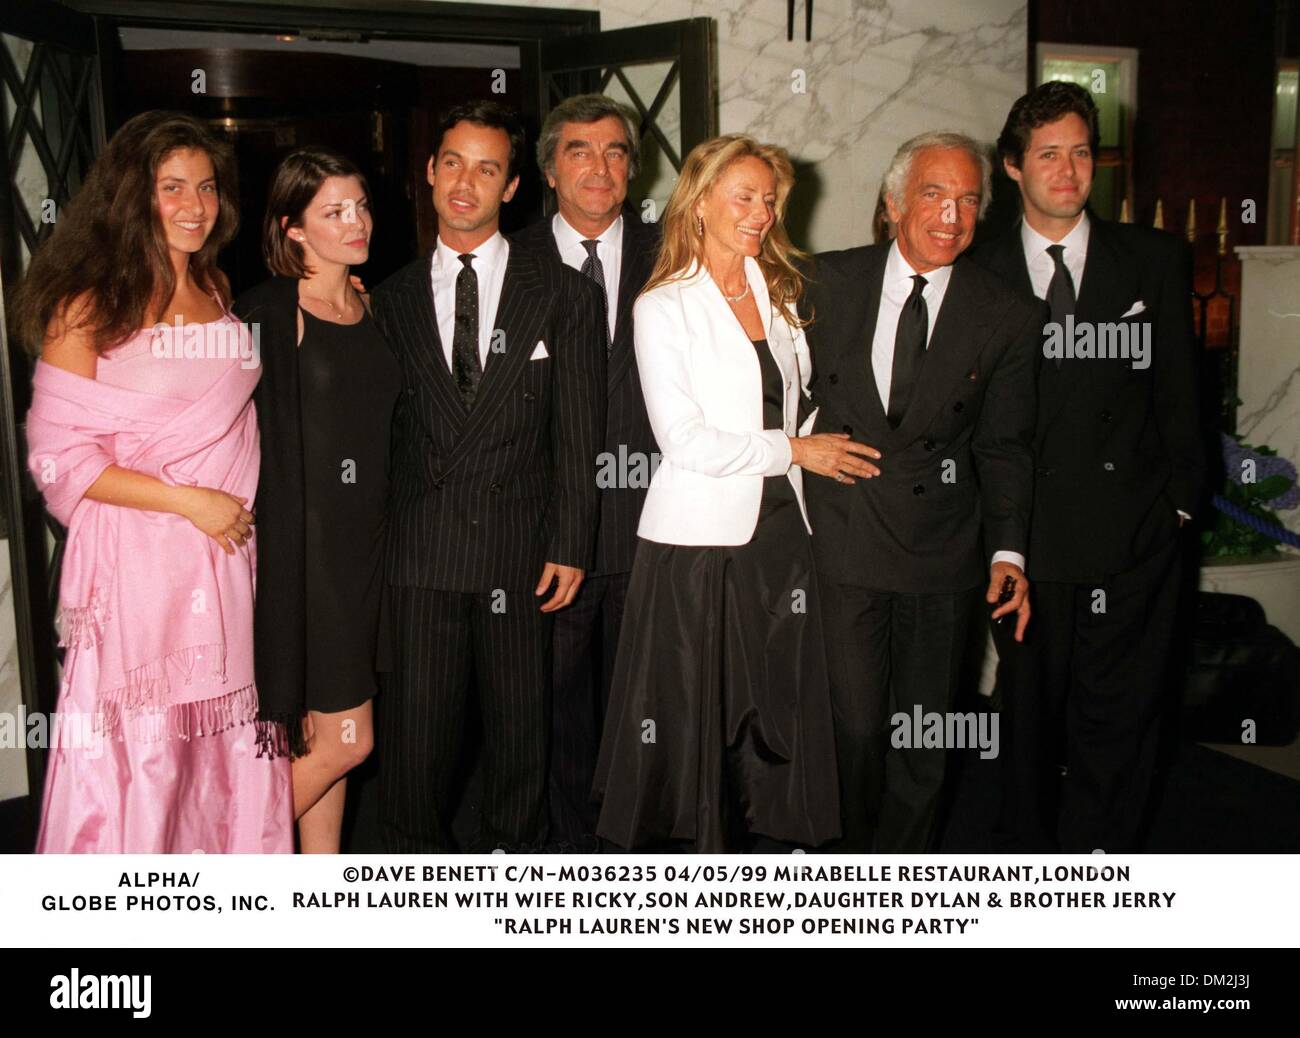 Apr. 5, 1999 - London, Great Britain - 04/05/99 MARIBELLE RESTAURANT,LONDON.Ralph  Lauren and his wife Ricky with their family - son Andrew, daughter Dylan  and brother Jerry.''RALPH LAUREN'S NEW SHOP OPENING PARTY'(Credit